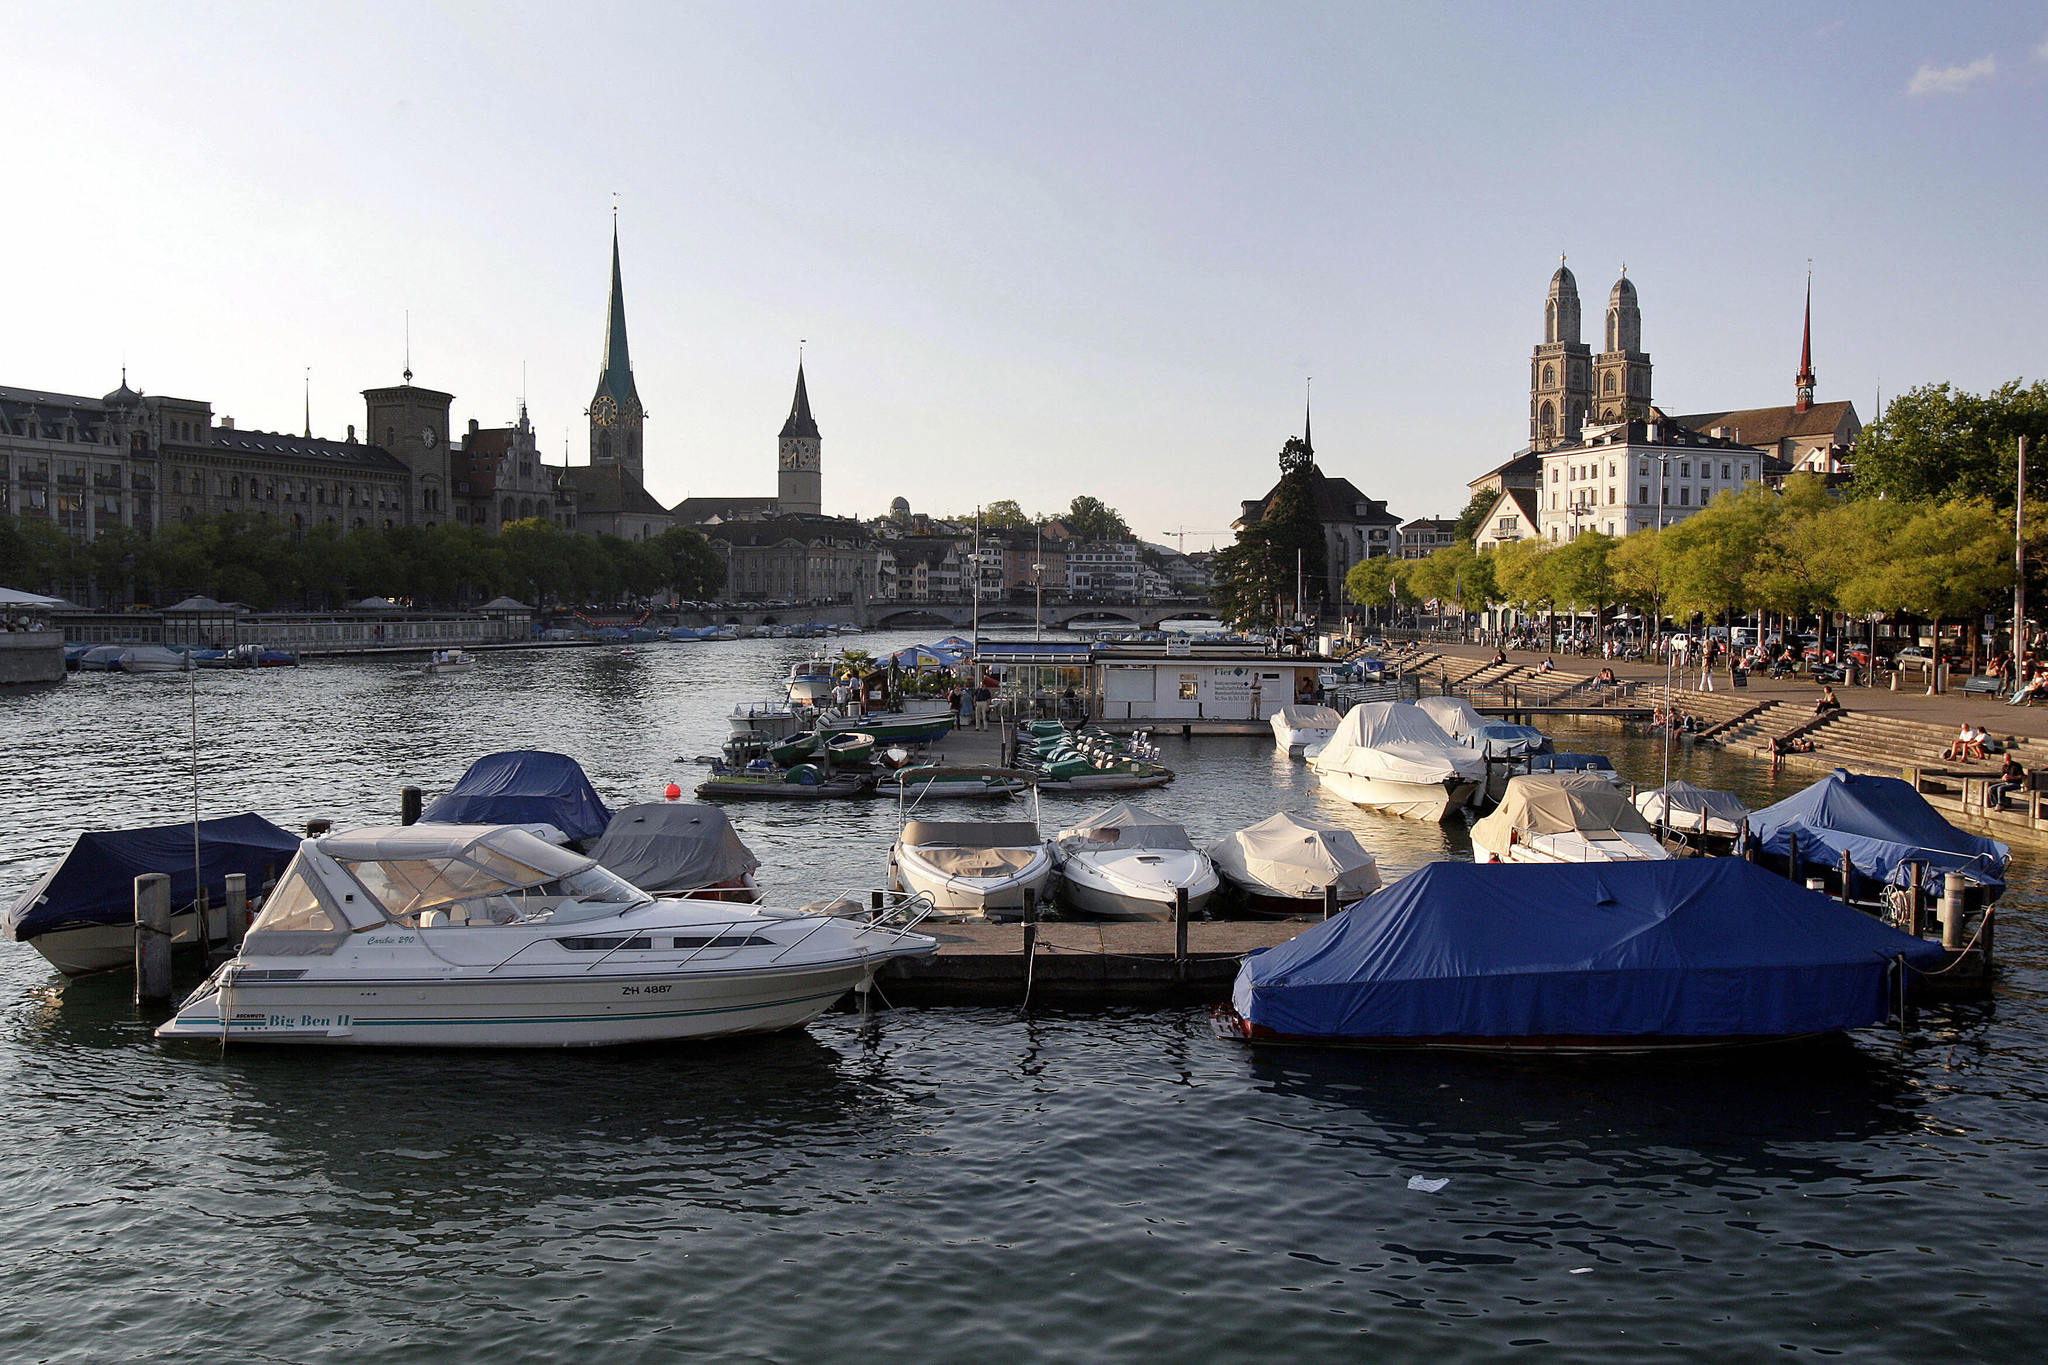 Switzerland's largest city, Zurich, takes the number two spot